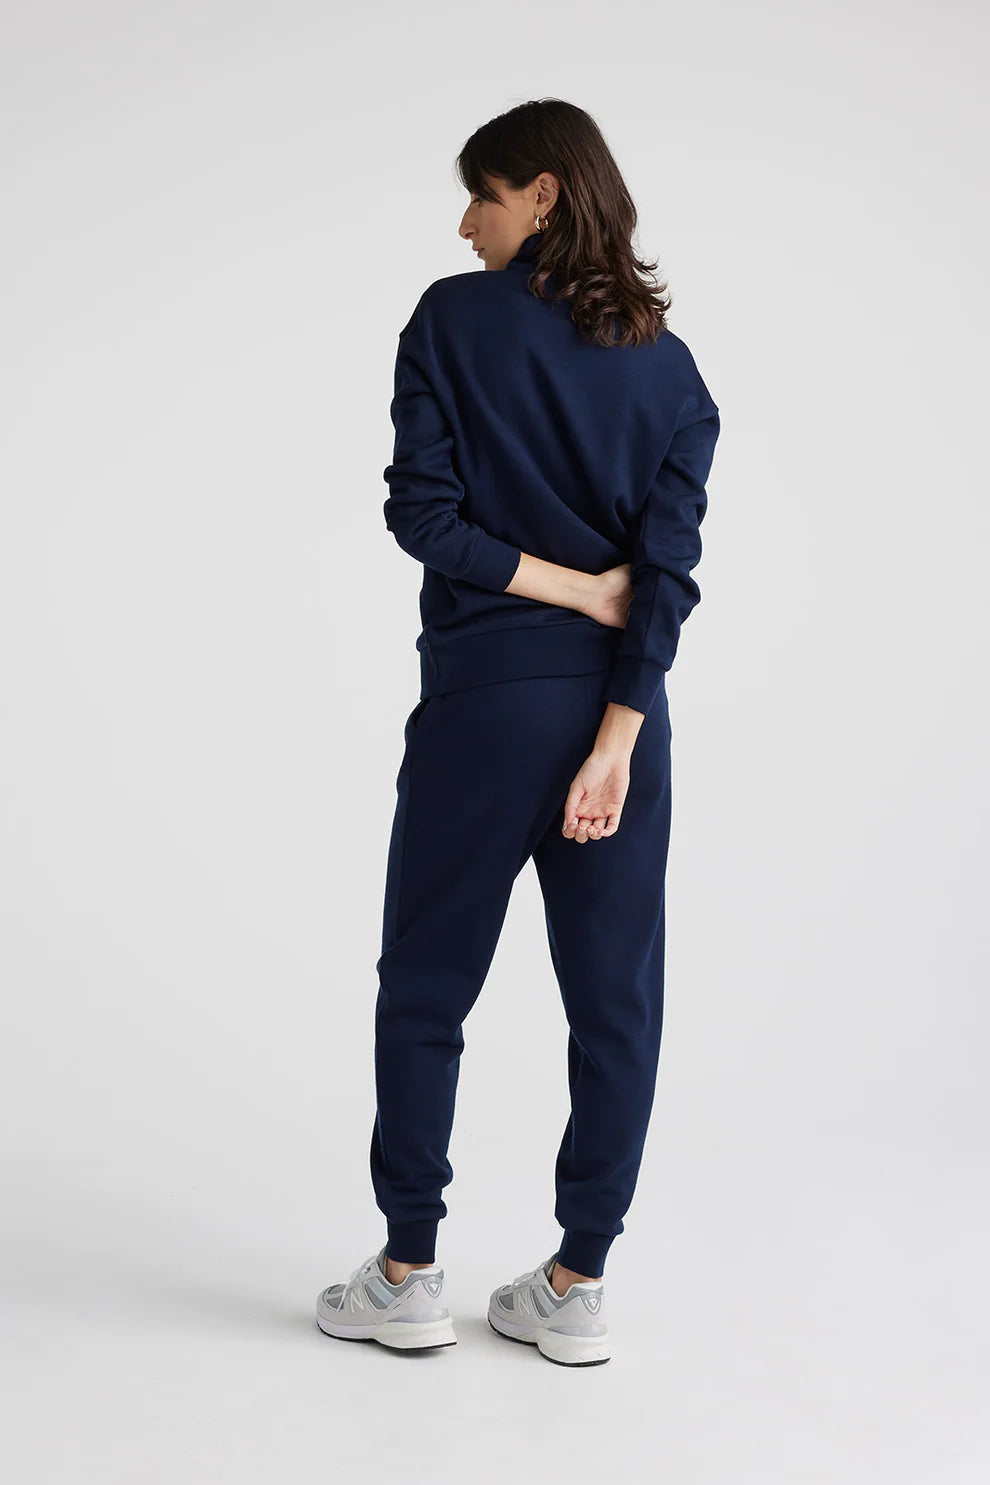 Wrap yourself in sophistication with our navy blue Merino wool sweater. Zip collar for a touch of modern flair.